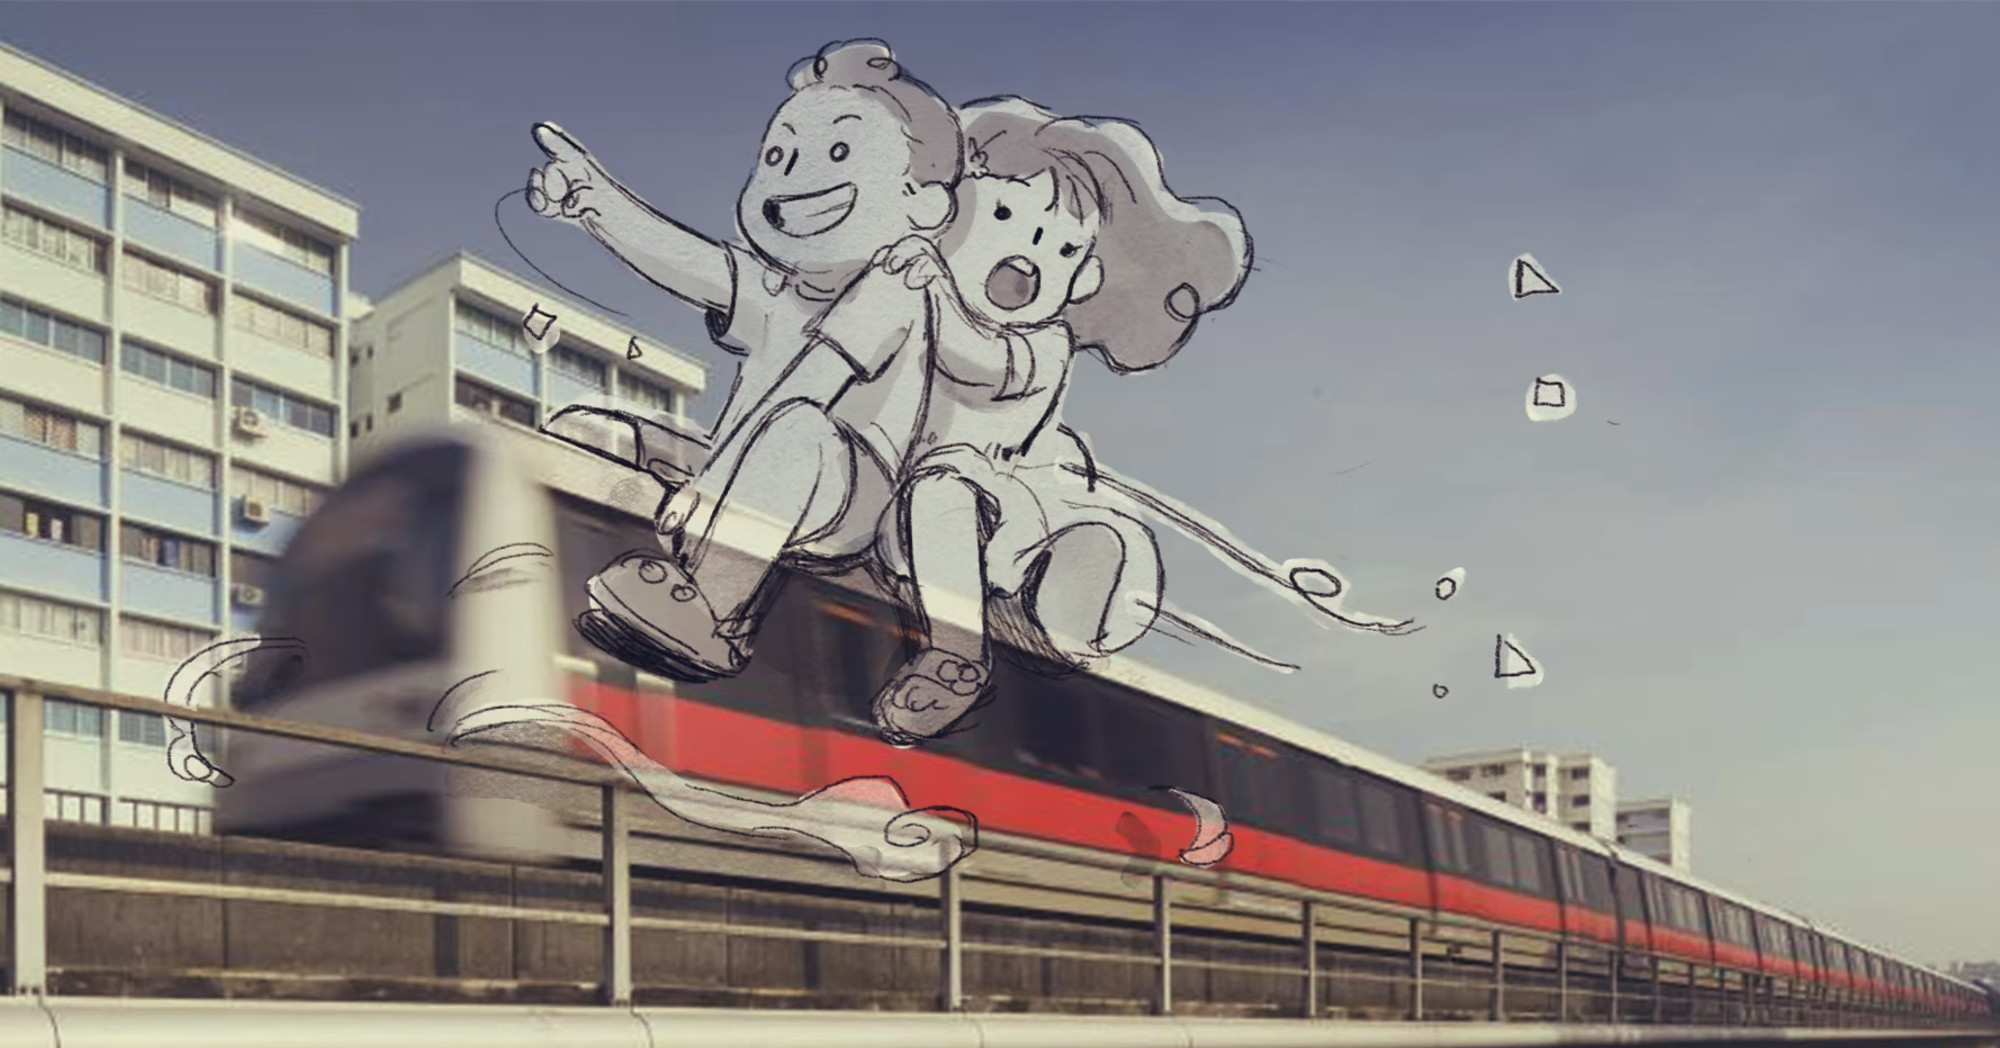 NDP 2021 Theme Song Music Video Features the MRT and Other Land Transport Elements Artistically Animated!